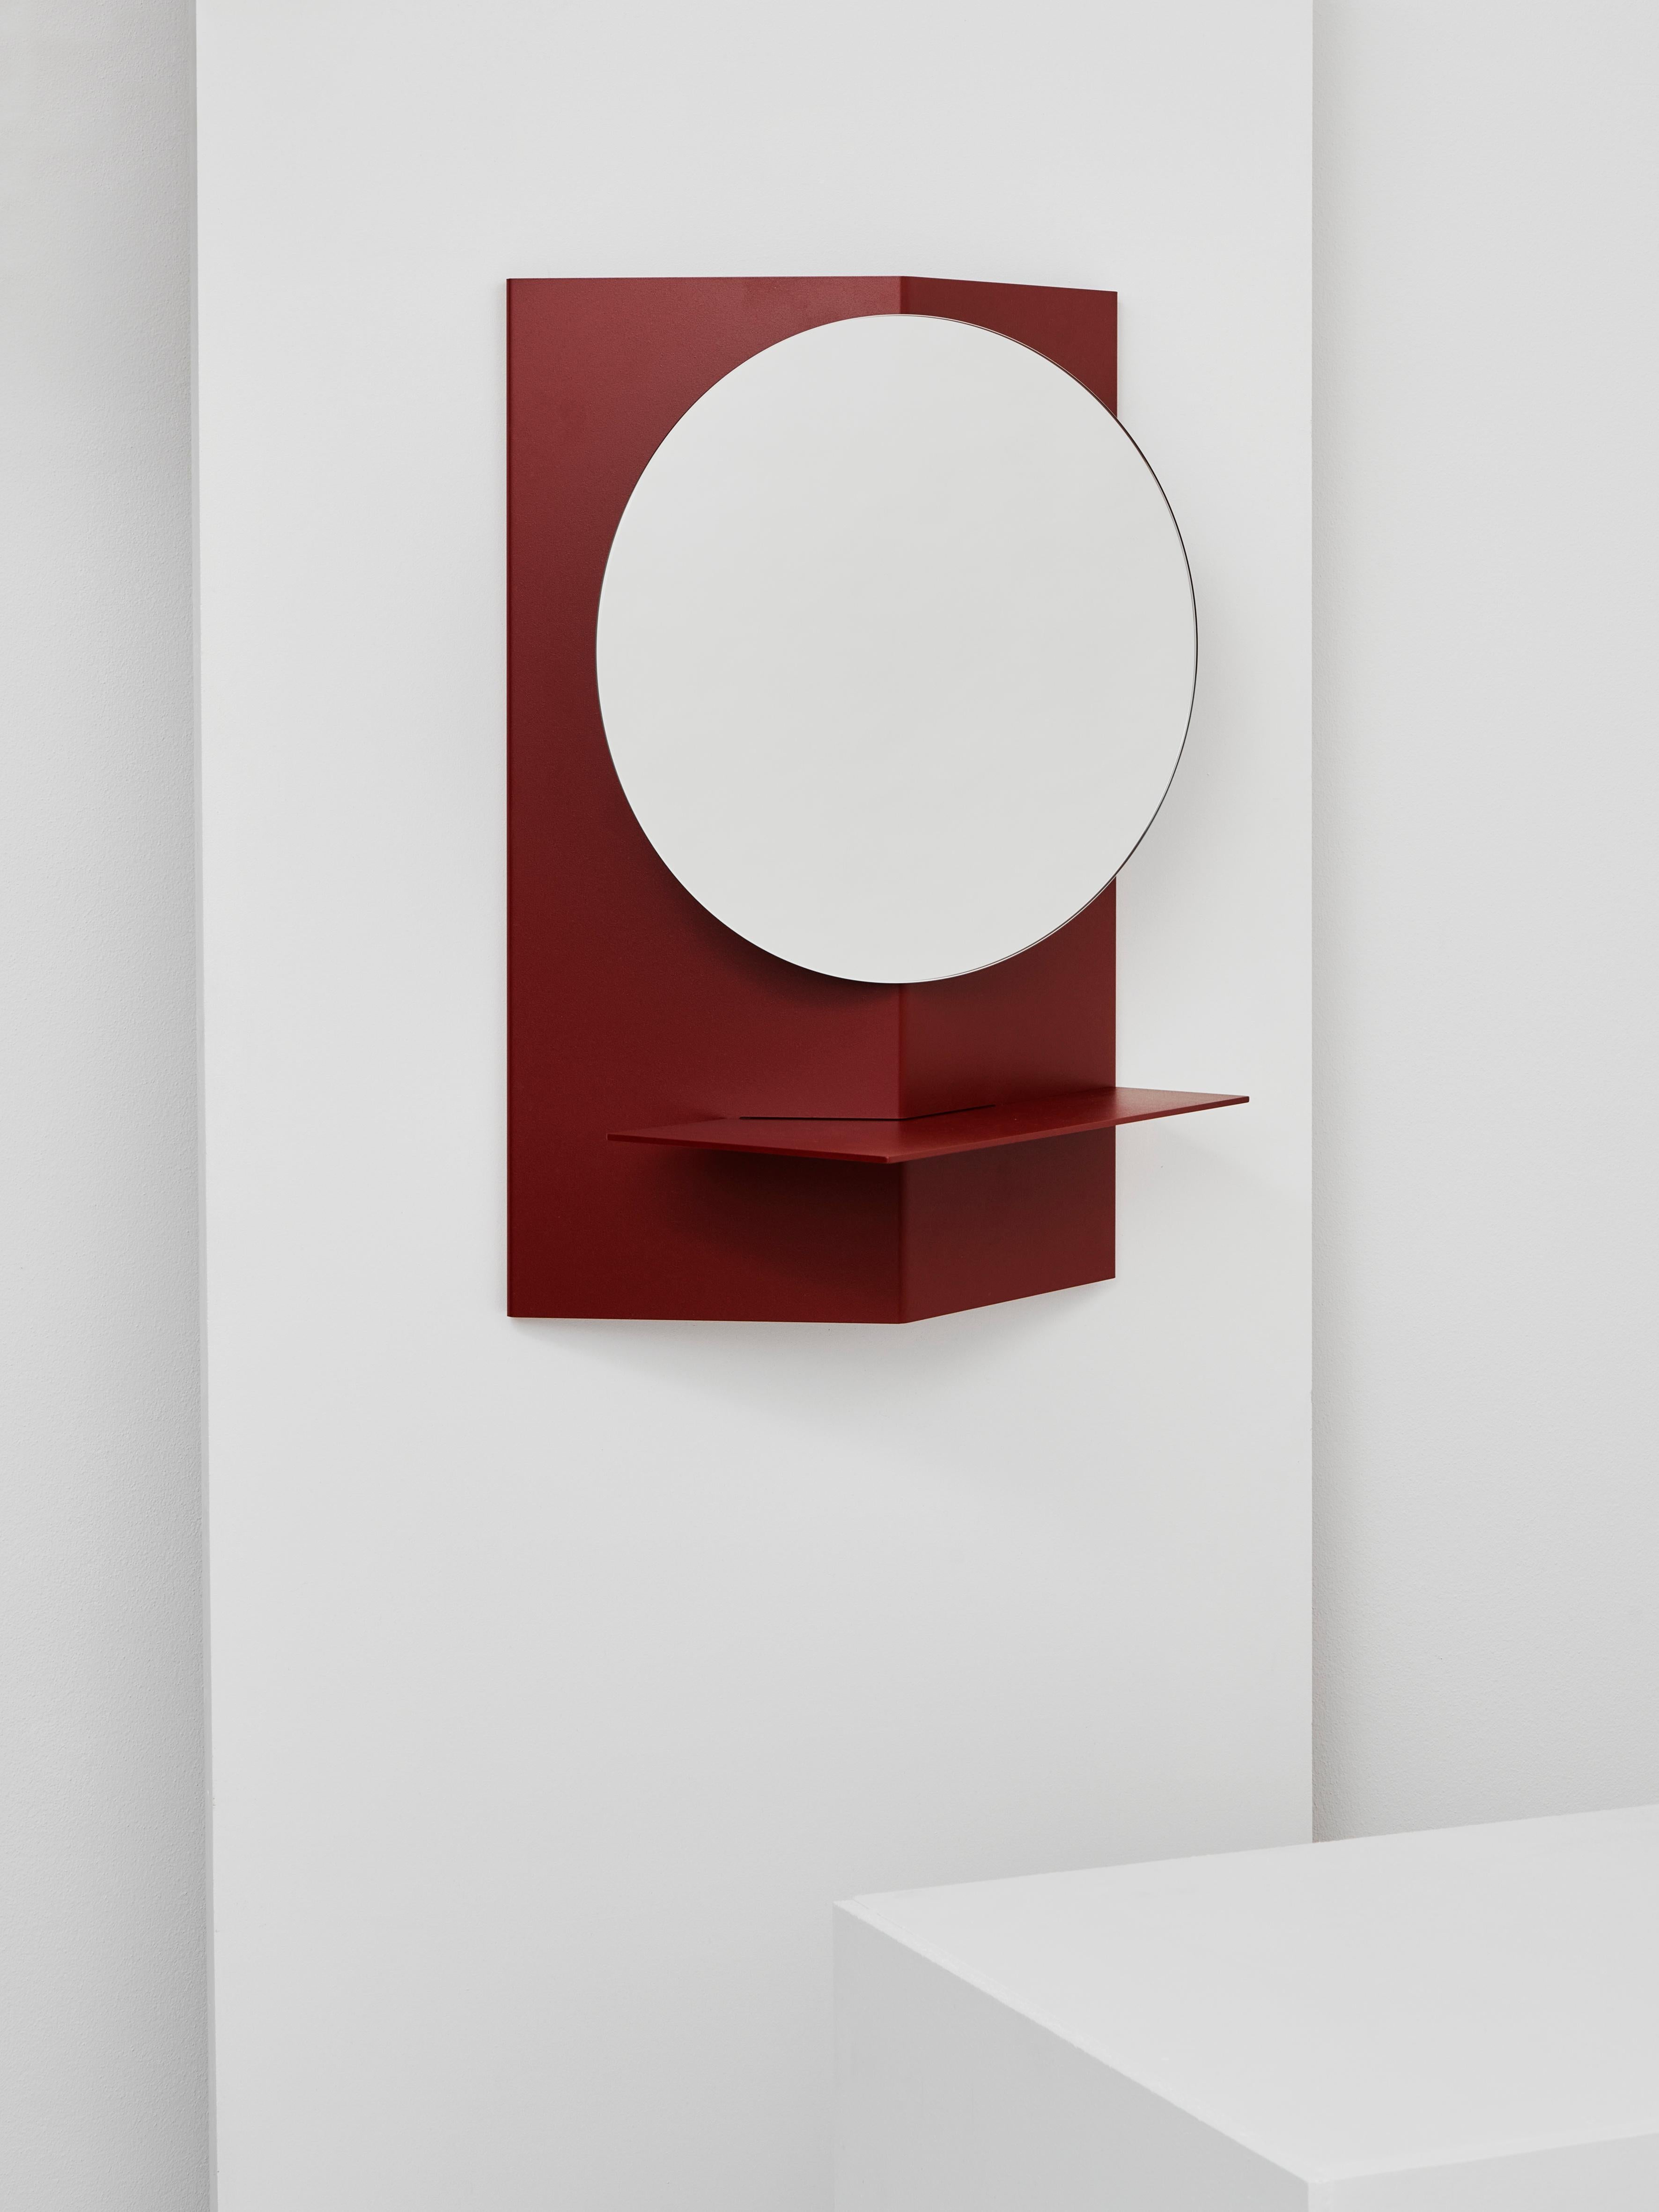 Folded - mirror.
The Folded wall cabinet acts as a shelf and mirror for the entrance or bedroom
read. The simple assembly allows you to alternate the two configurations, thus adapting to the changing needs of users:

In the Folded-mirror